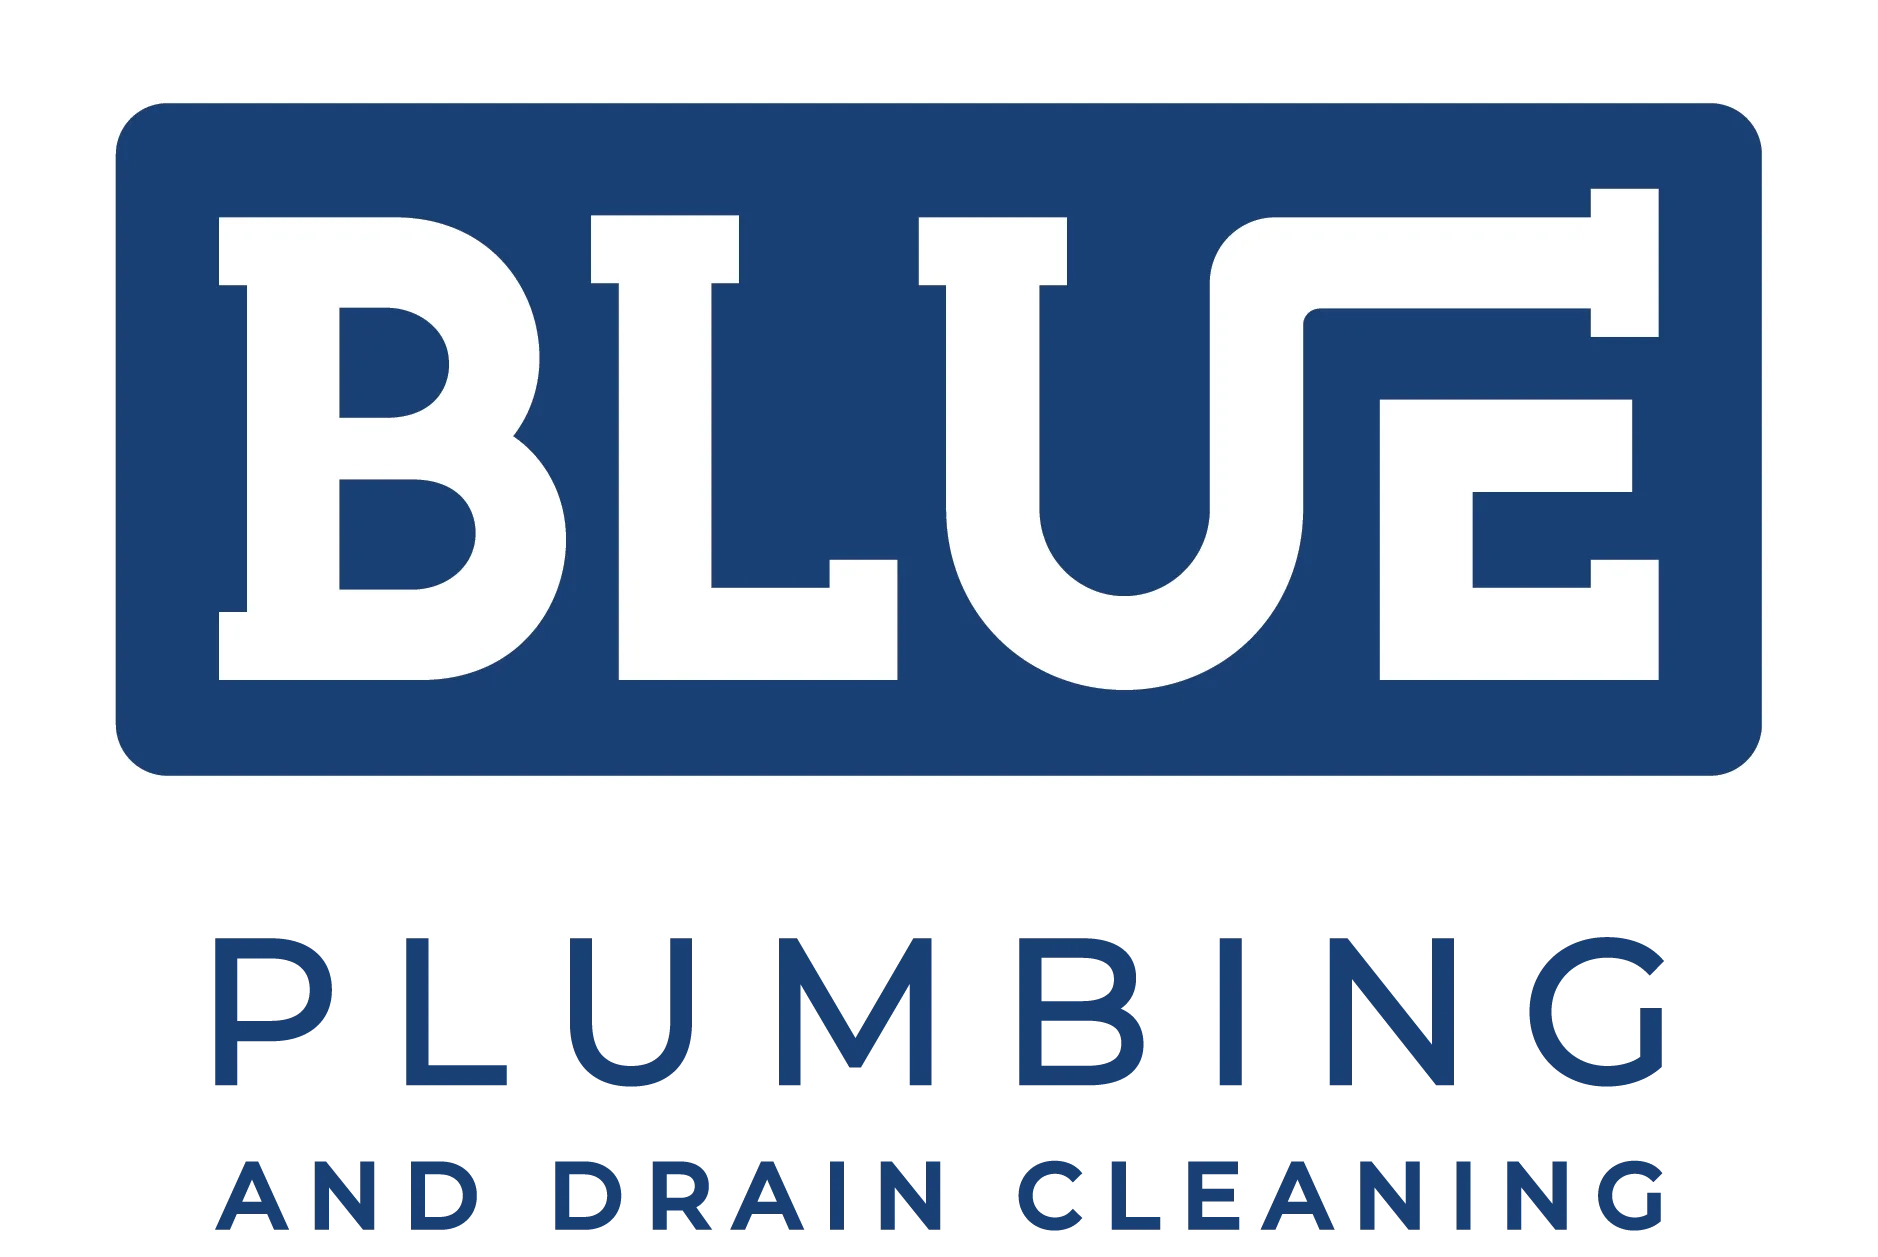 Blue Plumbing and Drain Cleaning Logo